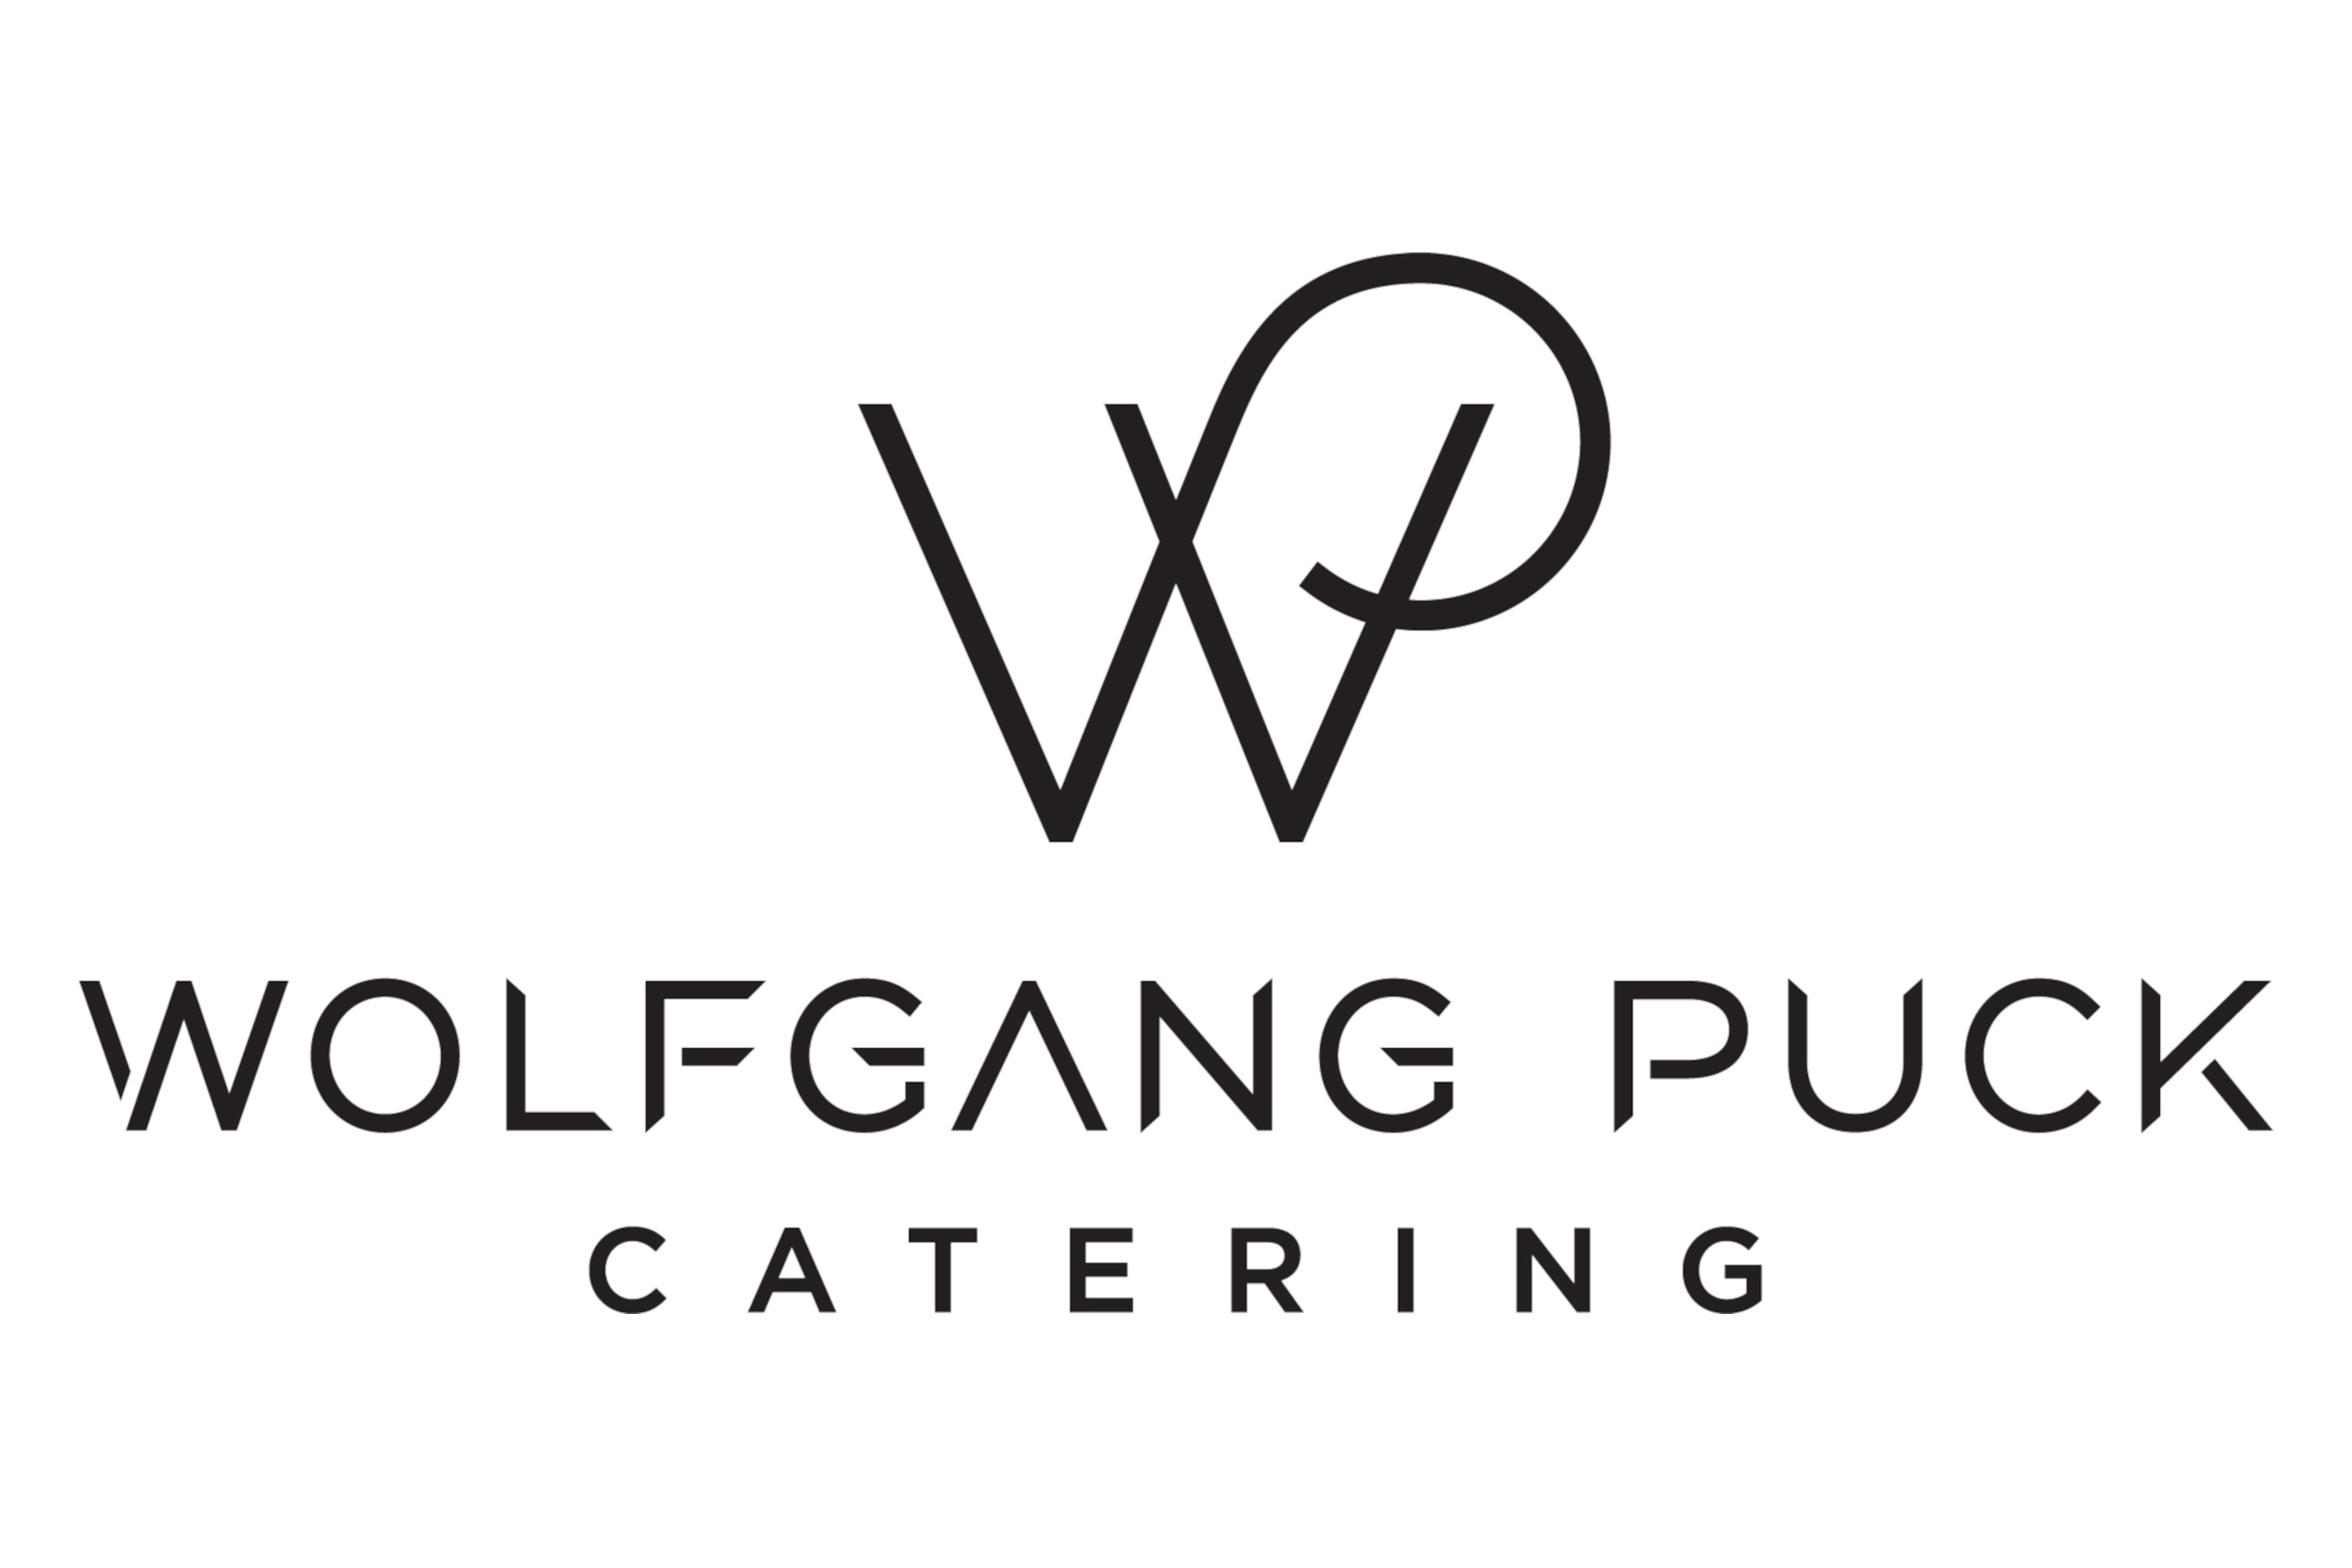 Stylized WP logo over Wolfgang Puck Catering text